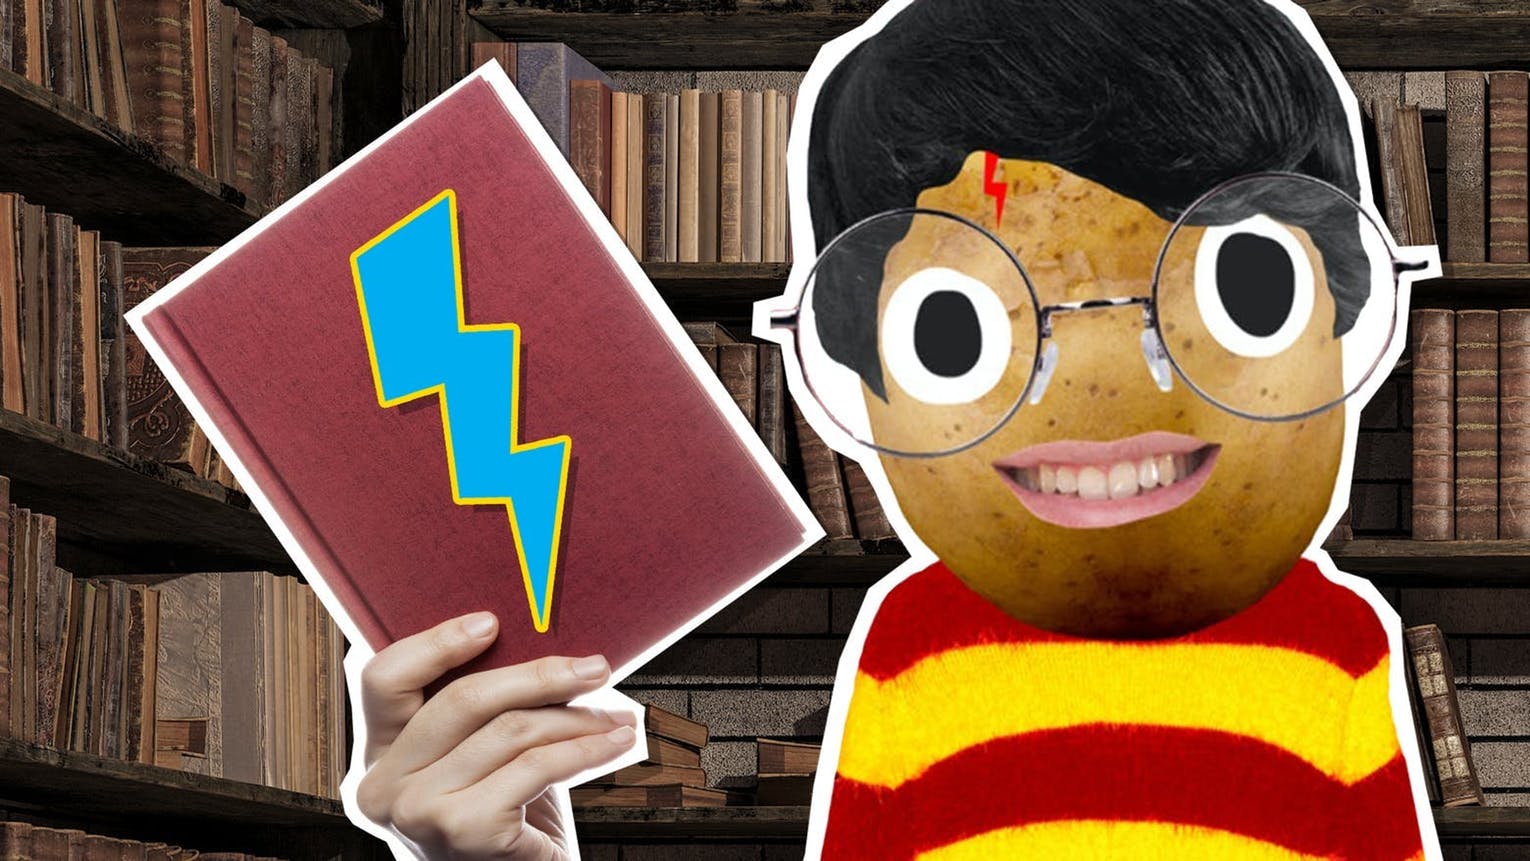 Harry Potter holding a book